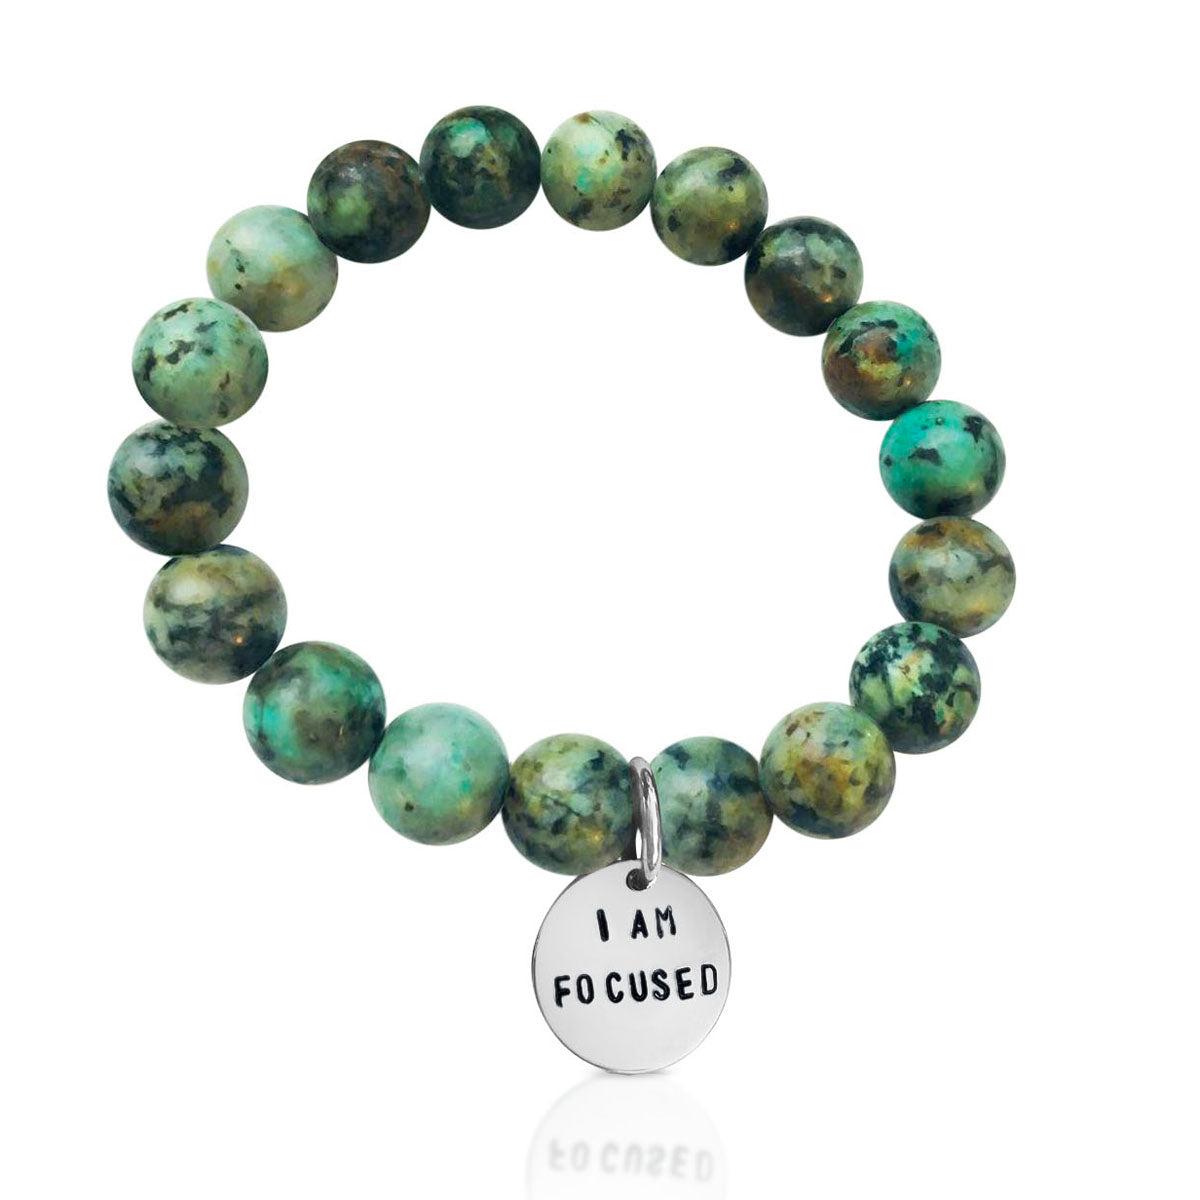 I am Focused Affirmation Bracelet with African Turquoise for Deeper Understanding of Life. This makes a great gift or present for the wholistic healer in your life. If you know someone who loves holistic meditation, affirmation healing, essential oils, or crystals this "I am focused" affirmation is perfect.